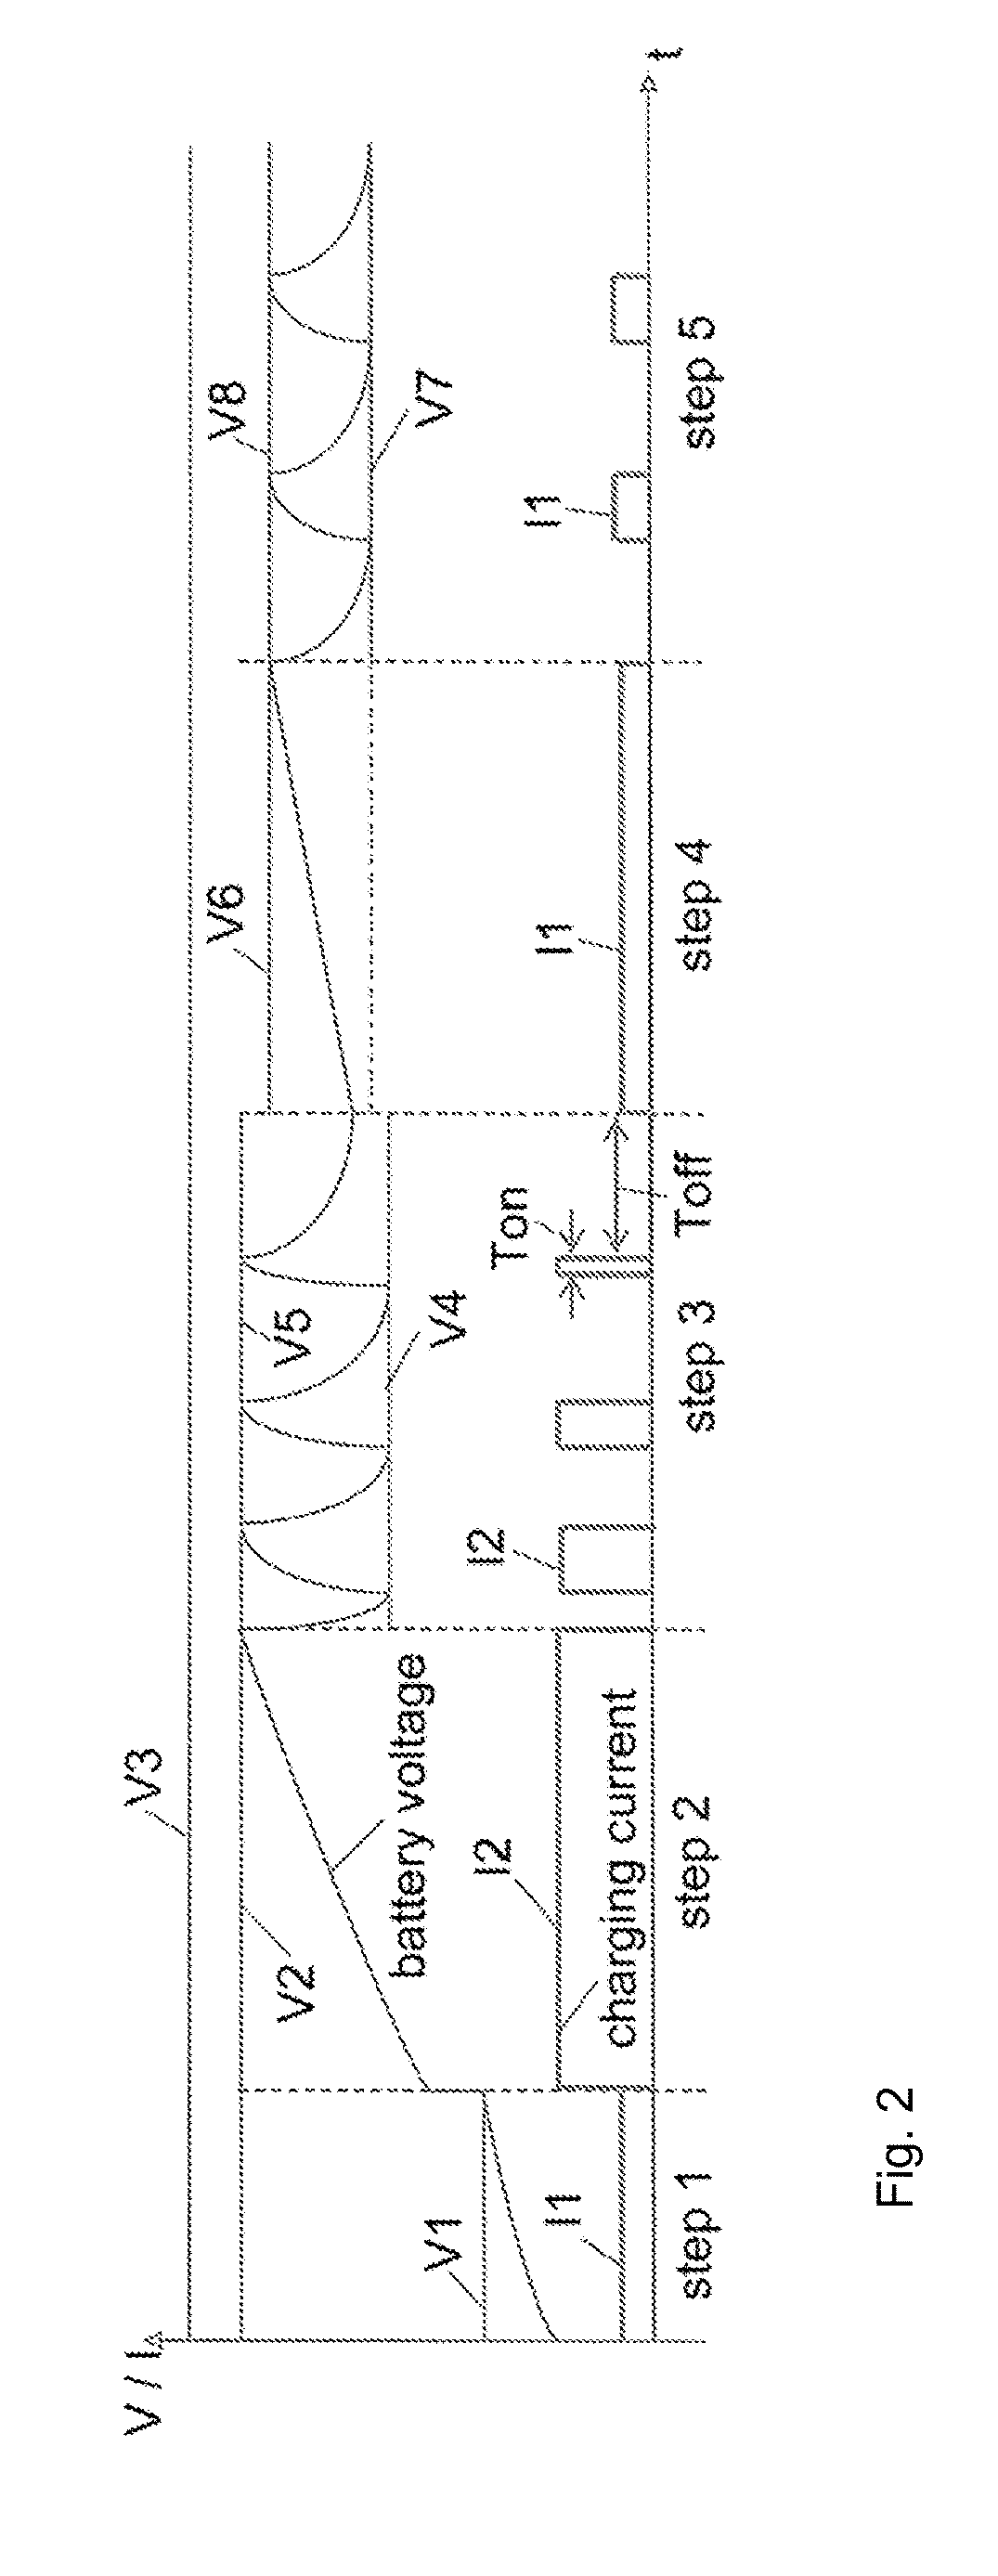 Method for charging a rechargeable battery of an electric device